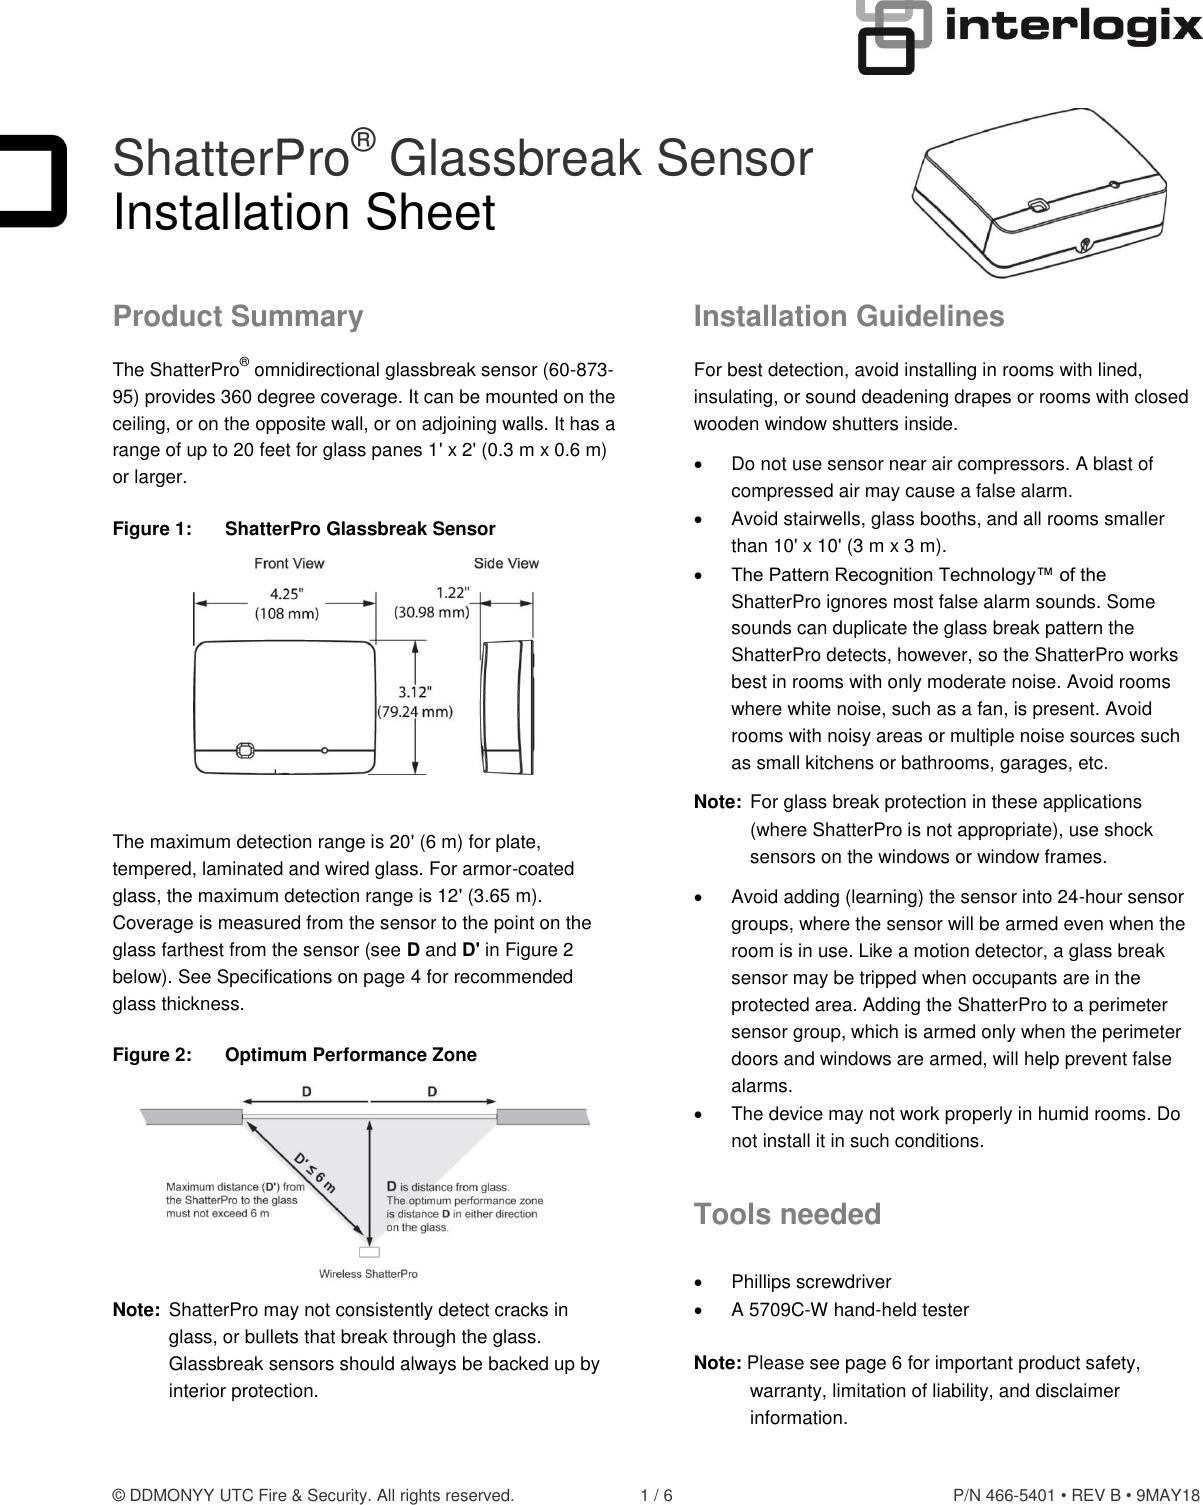 © DDMONYY UTC Fire &amp; Security. All rights reserved.  1 / 6  P/N 466-5401 • REV B • 9MAY18  ShatterPro® Glassbreak Sensor Installation Sheet Product Summary The ShatterPro® omnidirectional glassbreak sensor (60-873-95) provides 360 degree coverage. It can be mounted on the ceiling, or on the opposite wall, or on adjoining walls. It has a range of up to 20 feet for glass panes 1&apos; x 2&apos; (0.3 m x 0.6 m) or larger. Figure 1:  ShatterPro Glassbreak Sensor   The maximum detection range is 20&apos; (6 m) for plate, tempered, laminated and wired glass. For armor-coated glass, the maximum detection range is 12&apos; (3.65 m). Coverage is measured from the sensor to the point on the glass farthest from the sensor (see D and D&apos; in Figure 2 below). See Specifications on page 4 for recommended glass thickness. Figure 2:  Optimum Performance Zone  Note:  ShatterPro may not consistently detect cracks in glass, or bullets that break through the glass. Glassbreak sensors should always be backed up by interior protection. Installation Guidelines For best detection, avoid installing in rooms with lined, insulating, or sound deadening drapes or rooms with closed wooden window shutters inside.  Do not use sensor near air compressors. A blast of compressed air may cause a false alarm.   Avoid stairwells, glass booths, and all rooms smaller than 10&apos; x 10&apos; (3 m x 3 m).  The Pattern Recognition Technology™ of the ShatterPro ignores most false alarm sounds. Some sounds can duplicate the glass break pattern the ShatterPro detects, however, so the ShatterPro works best in rooms with only moderate noise. Avoid rooms where white noise, such as a fan, is present. Avoid rooms with noisy areas or multiple noise sources such as small kitchens or bathrooms, garages, etc. Note:  For glass break protection in these applications (where ShatterPro is not appropriate), use shock sensors on the windows or window frames.   Avoid adding (learning) the sensor into 24-hour sensor groups, where the sensor will be armed even when the room is in use. Like a motion detector, a glass break sensor may be tripped when occupants are in the protected area. Adding the ShatterPro to a perimeter sensor group, which is armed only when the perimeter doors and windows are armed, will help prevent false alarms.   The device may not work properly in humid rooms. Do not install it in such conditions. Tools needed   Phillips screwdriver   A 5709C-W hand-held tester  Note: Please see page 6 for important product safety, warranty, limitation of liability, and disclaimer information.  